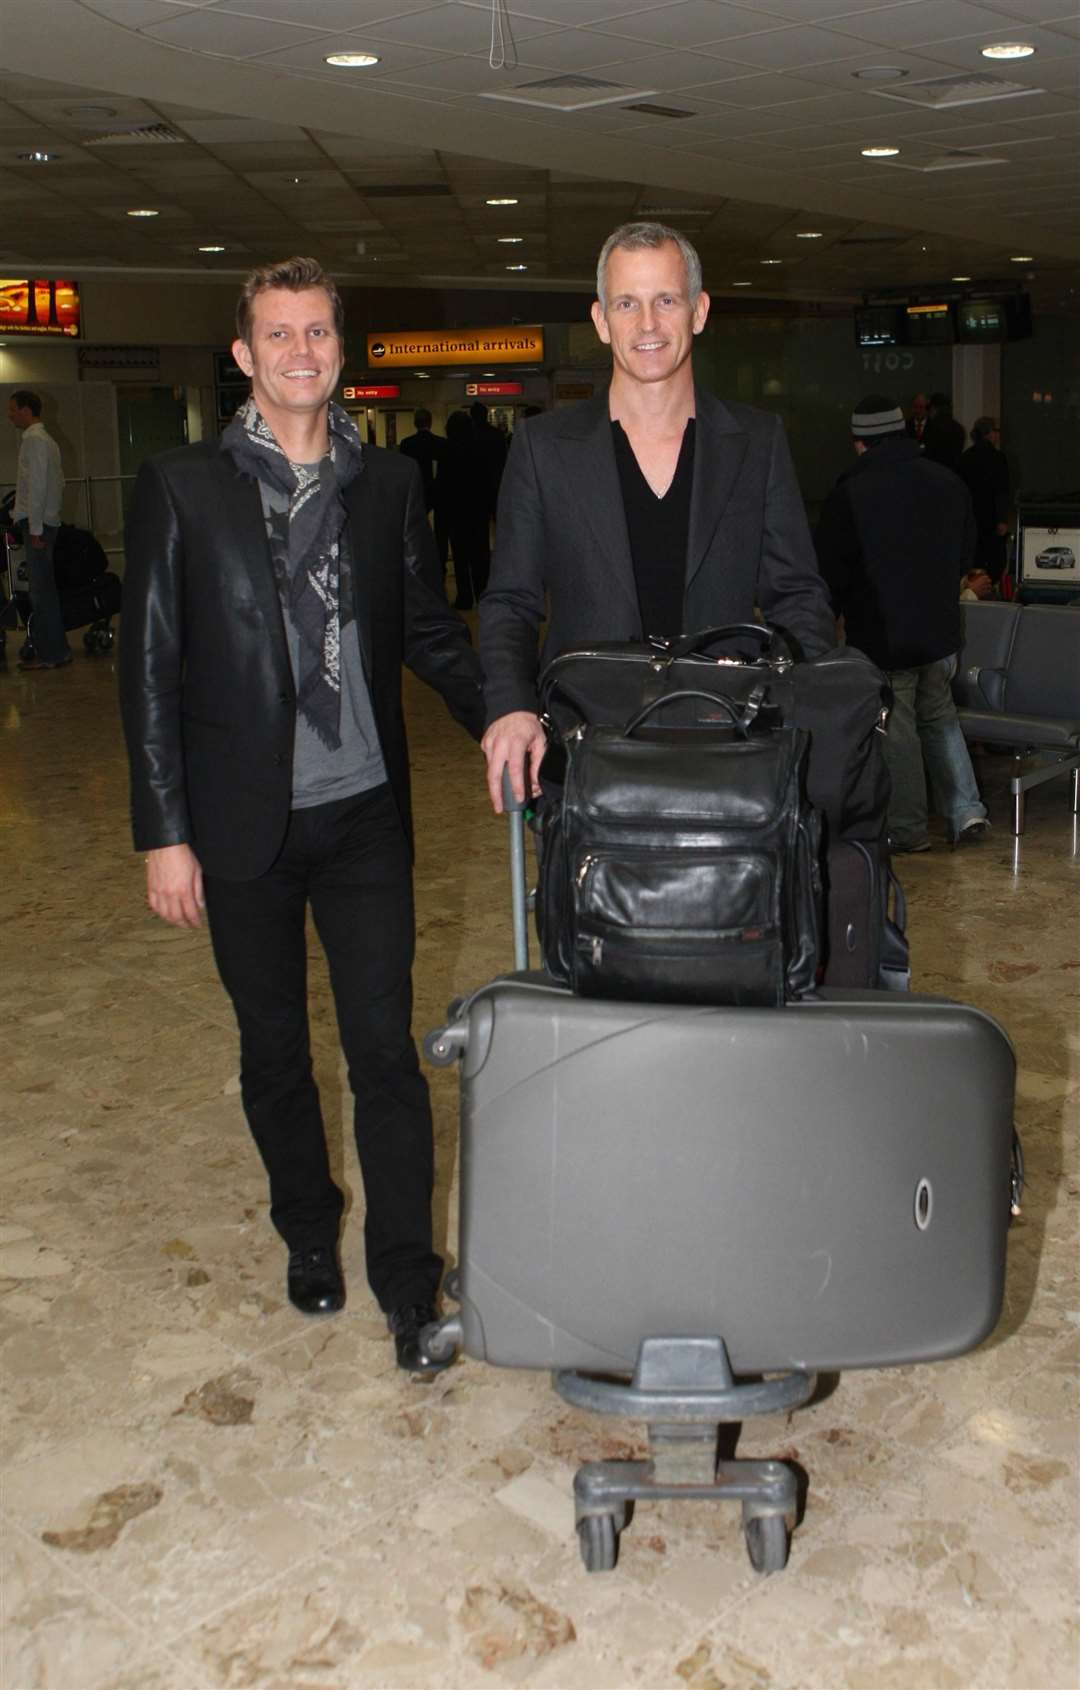 Brian Paddick with Petter Belsvik after they arrived at London’s Heathrow Airport on a flight from Australia following his time on I’m a Celebrity in 2008 (PA)